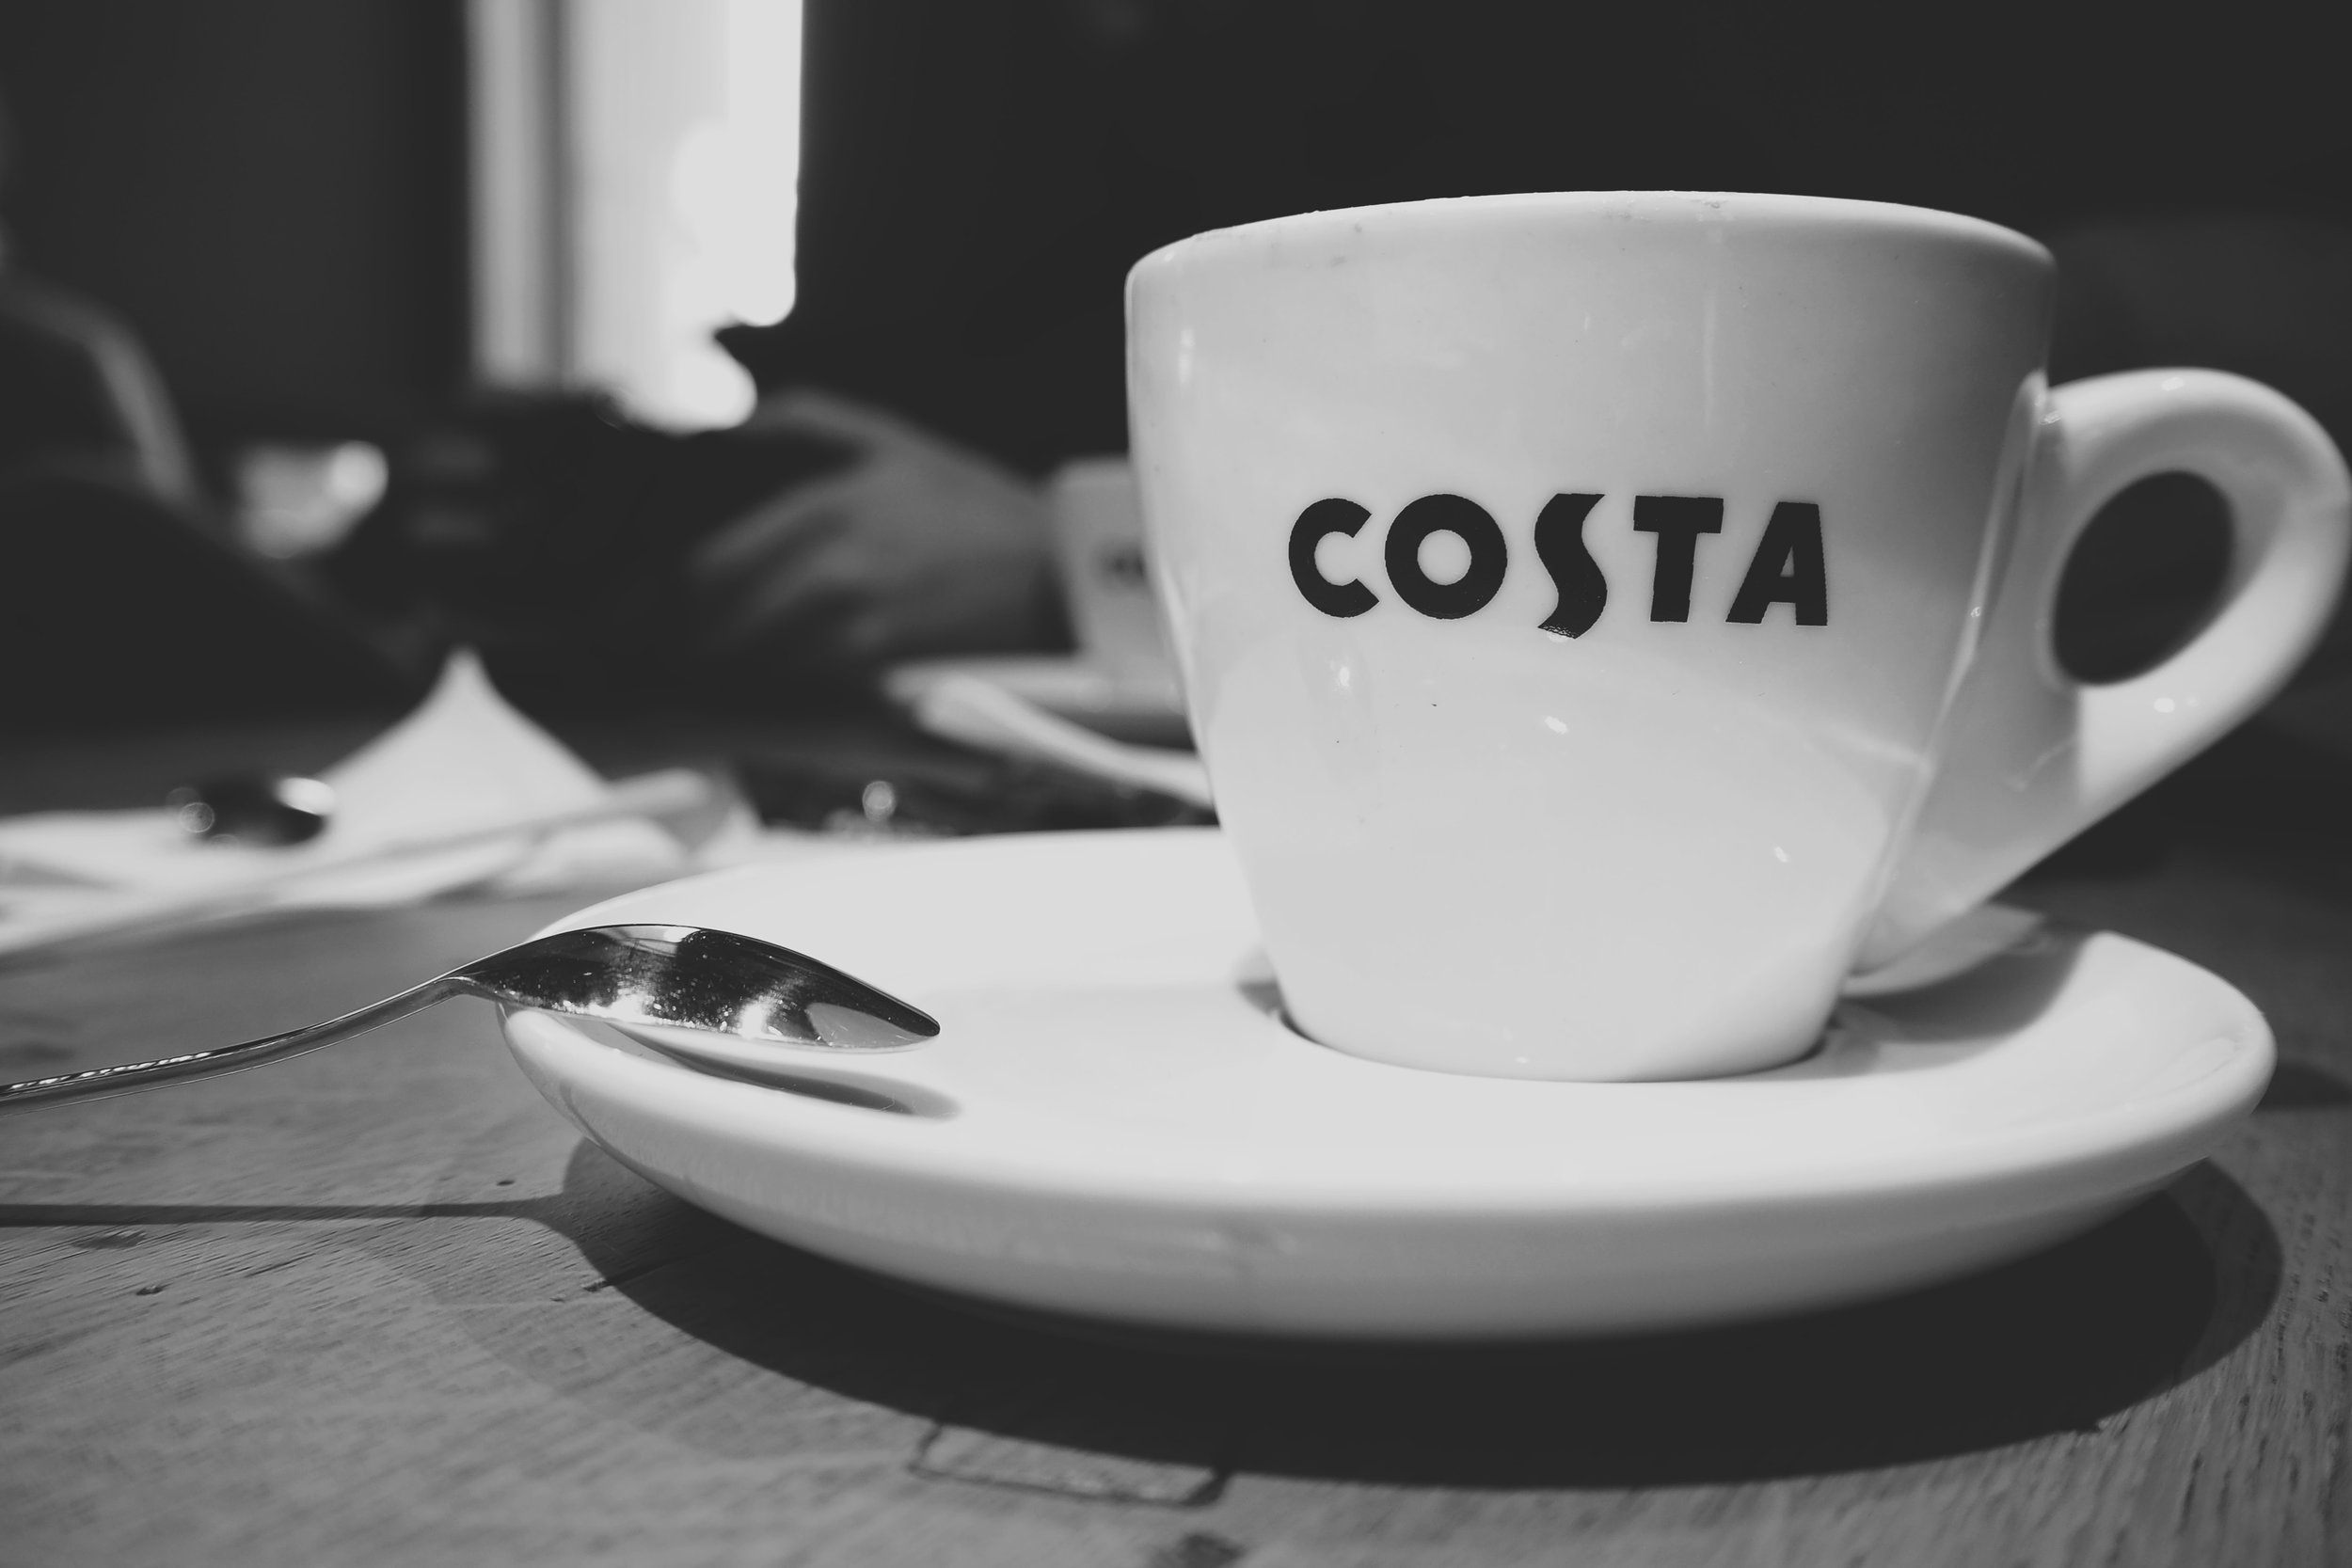 A Costa coffee cup sits on a table